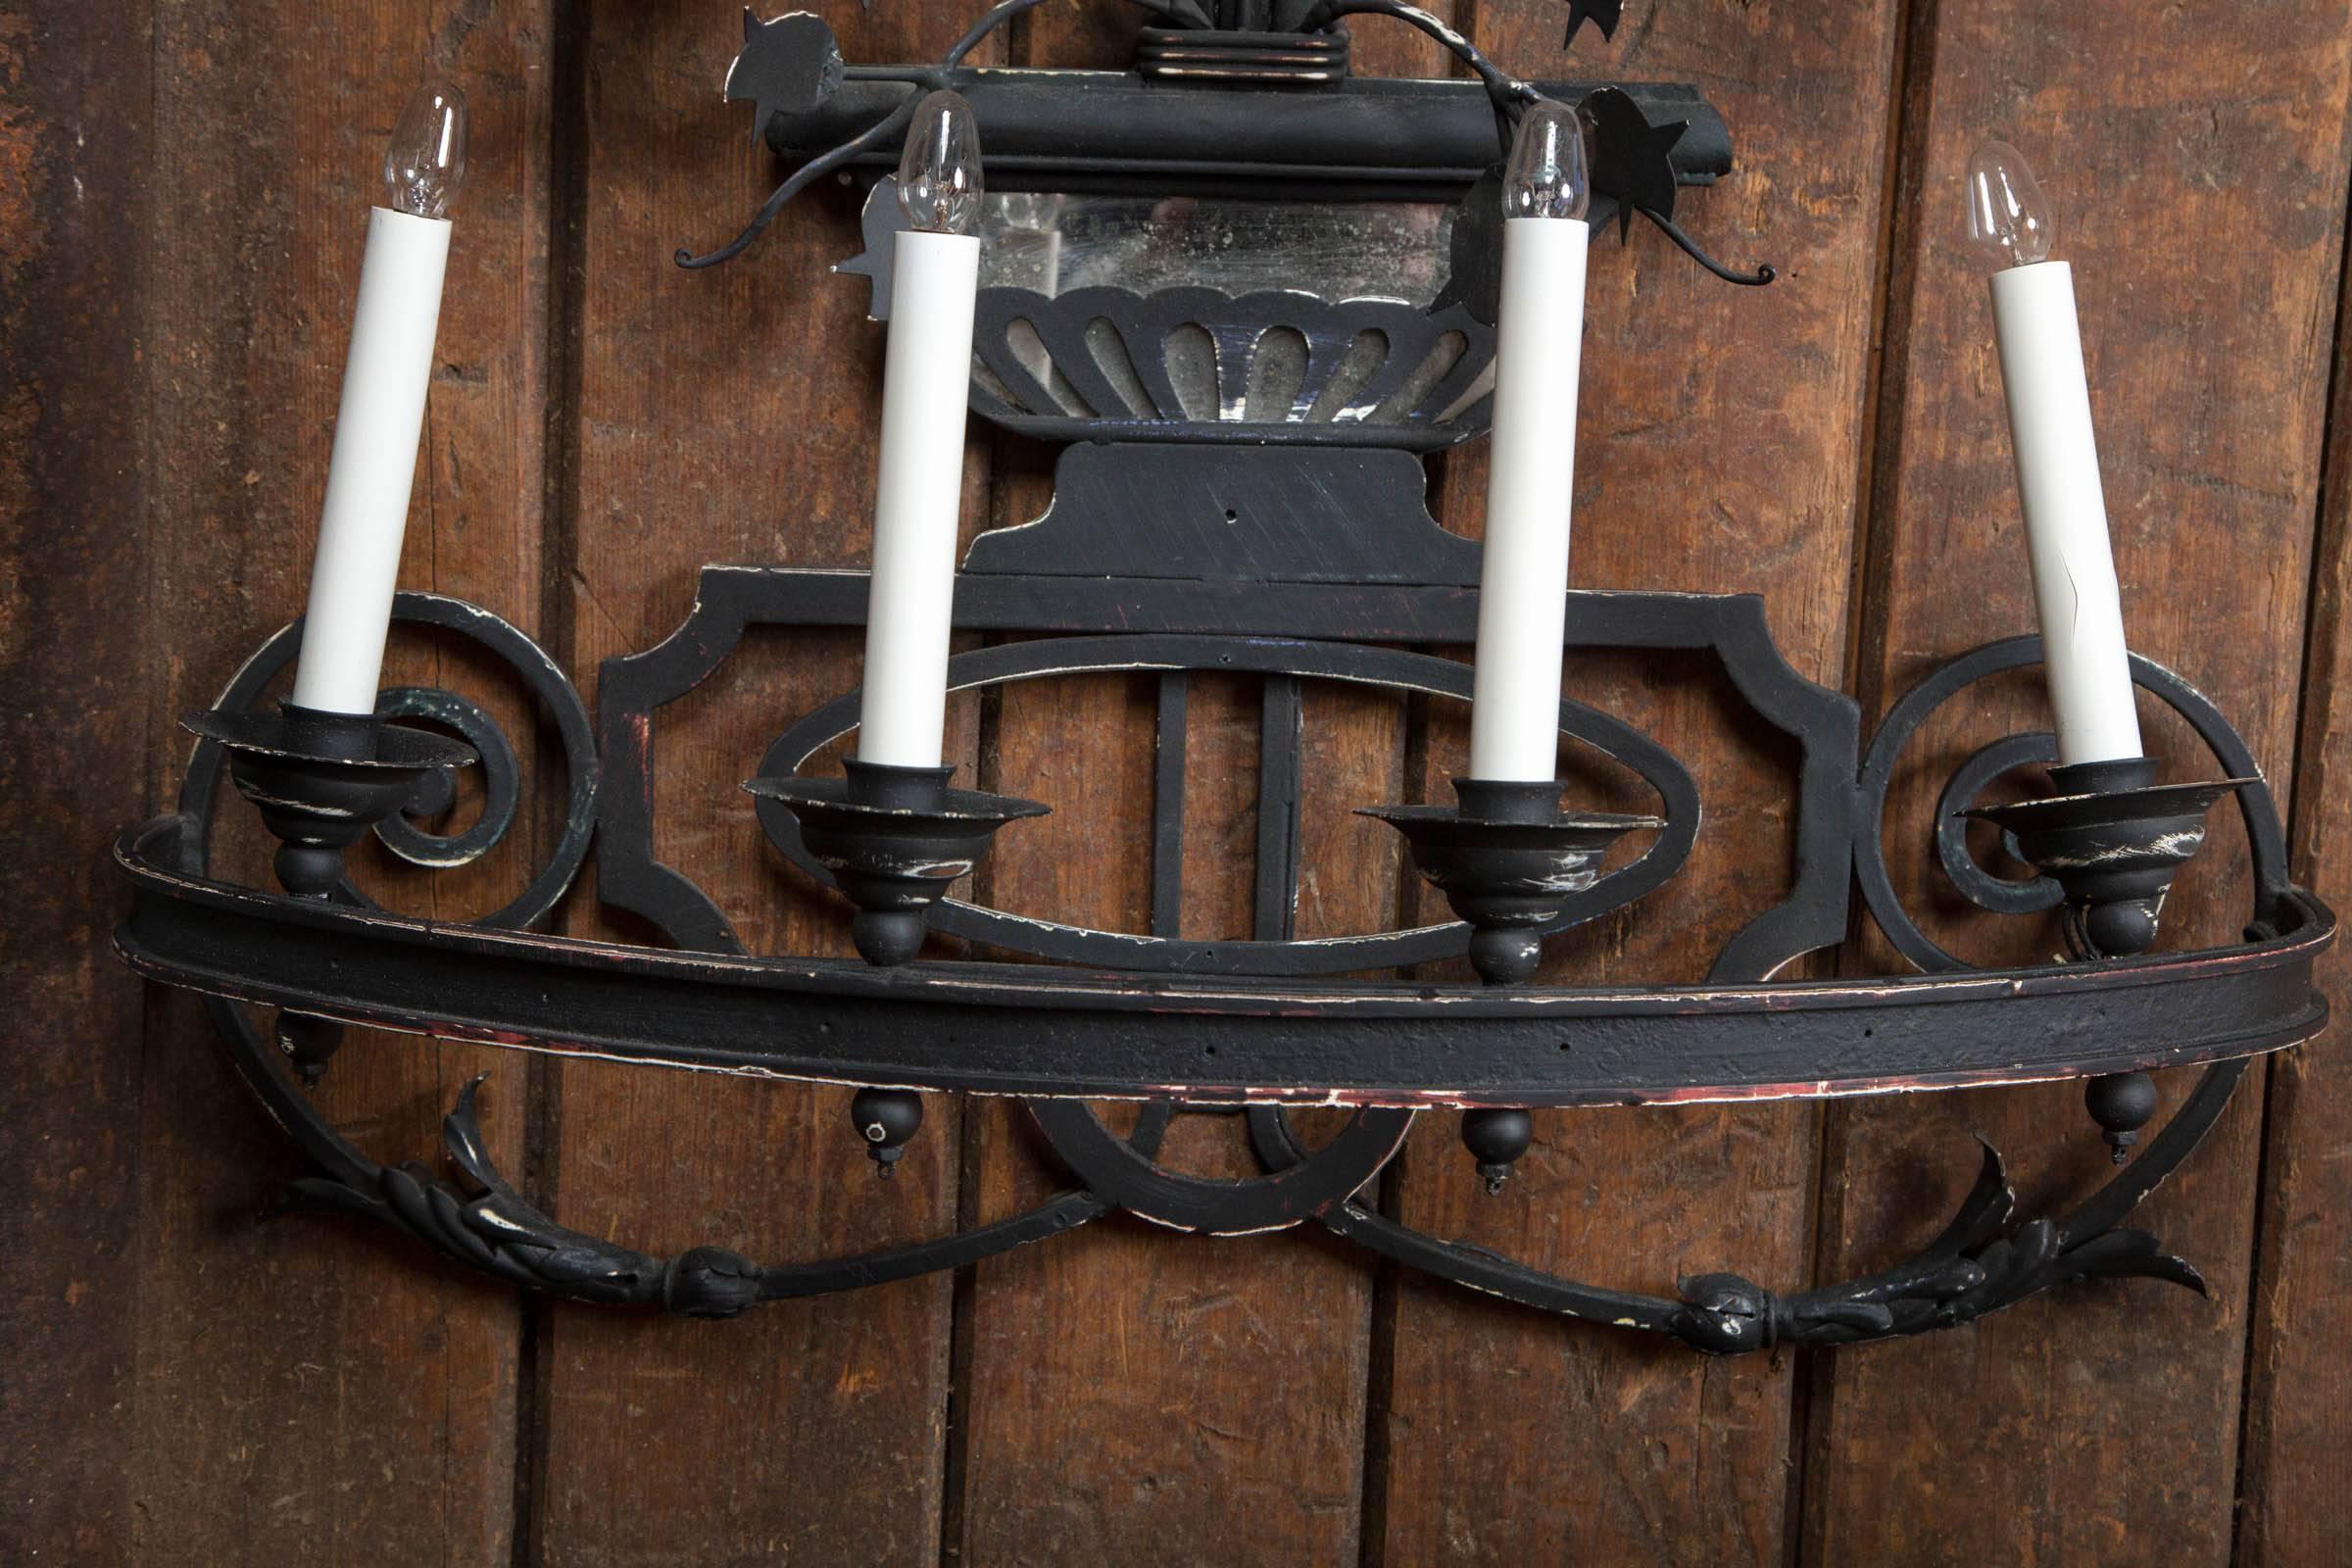 Large stylish black wrought iron wall sconce. It is electrified with seven candles. It would also be great with real candles. There is a decorative urn with flowers below the round distressed mirror. The sconce is topped with scrolls. A nice